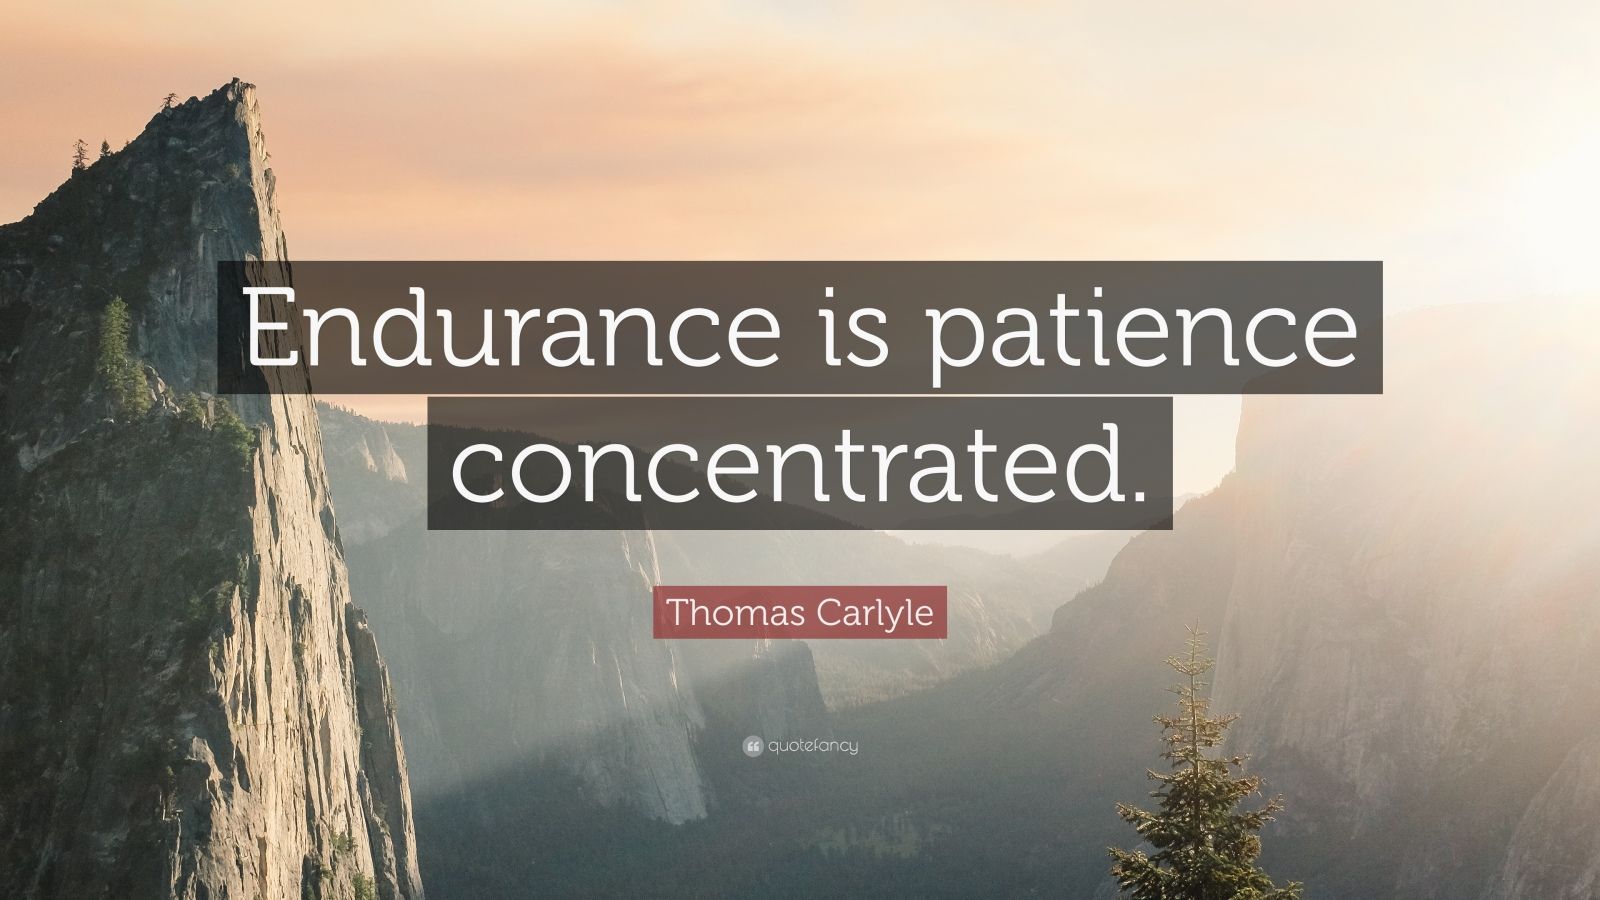 Thomas Carlyle Quote: “Endurance is patience concentrated.” (22 ...